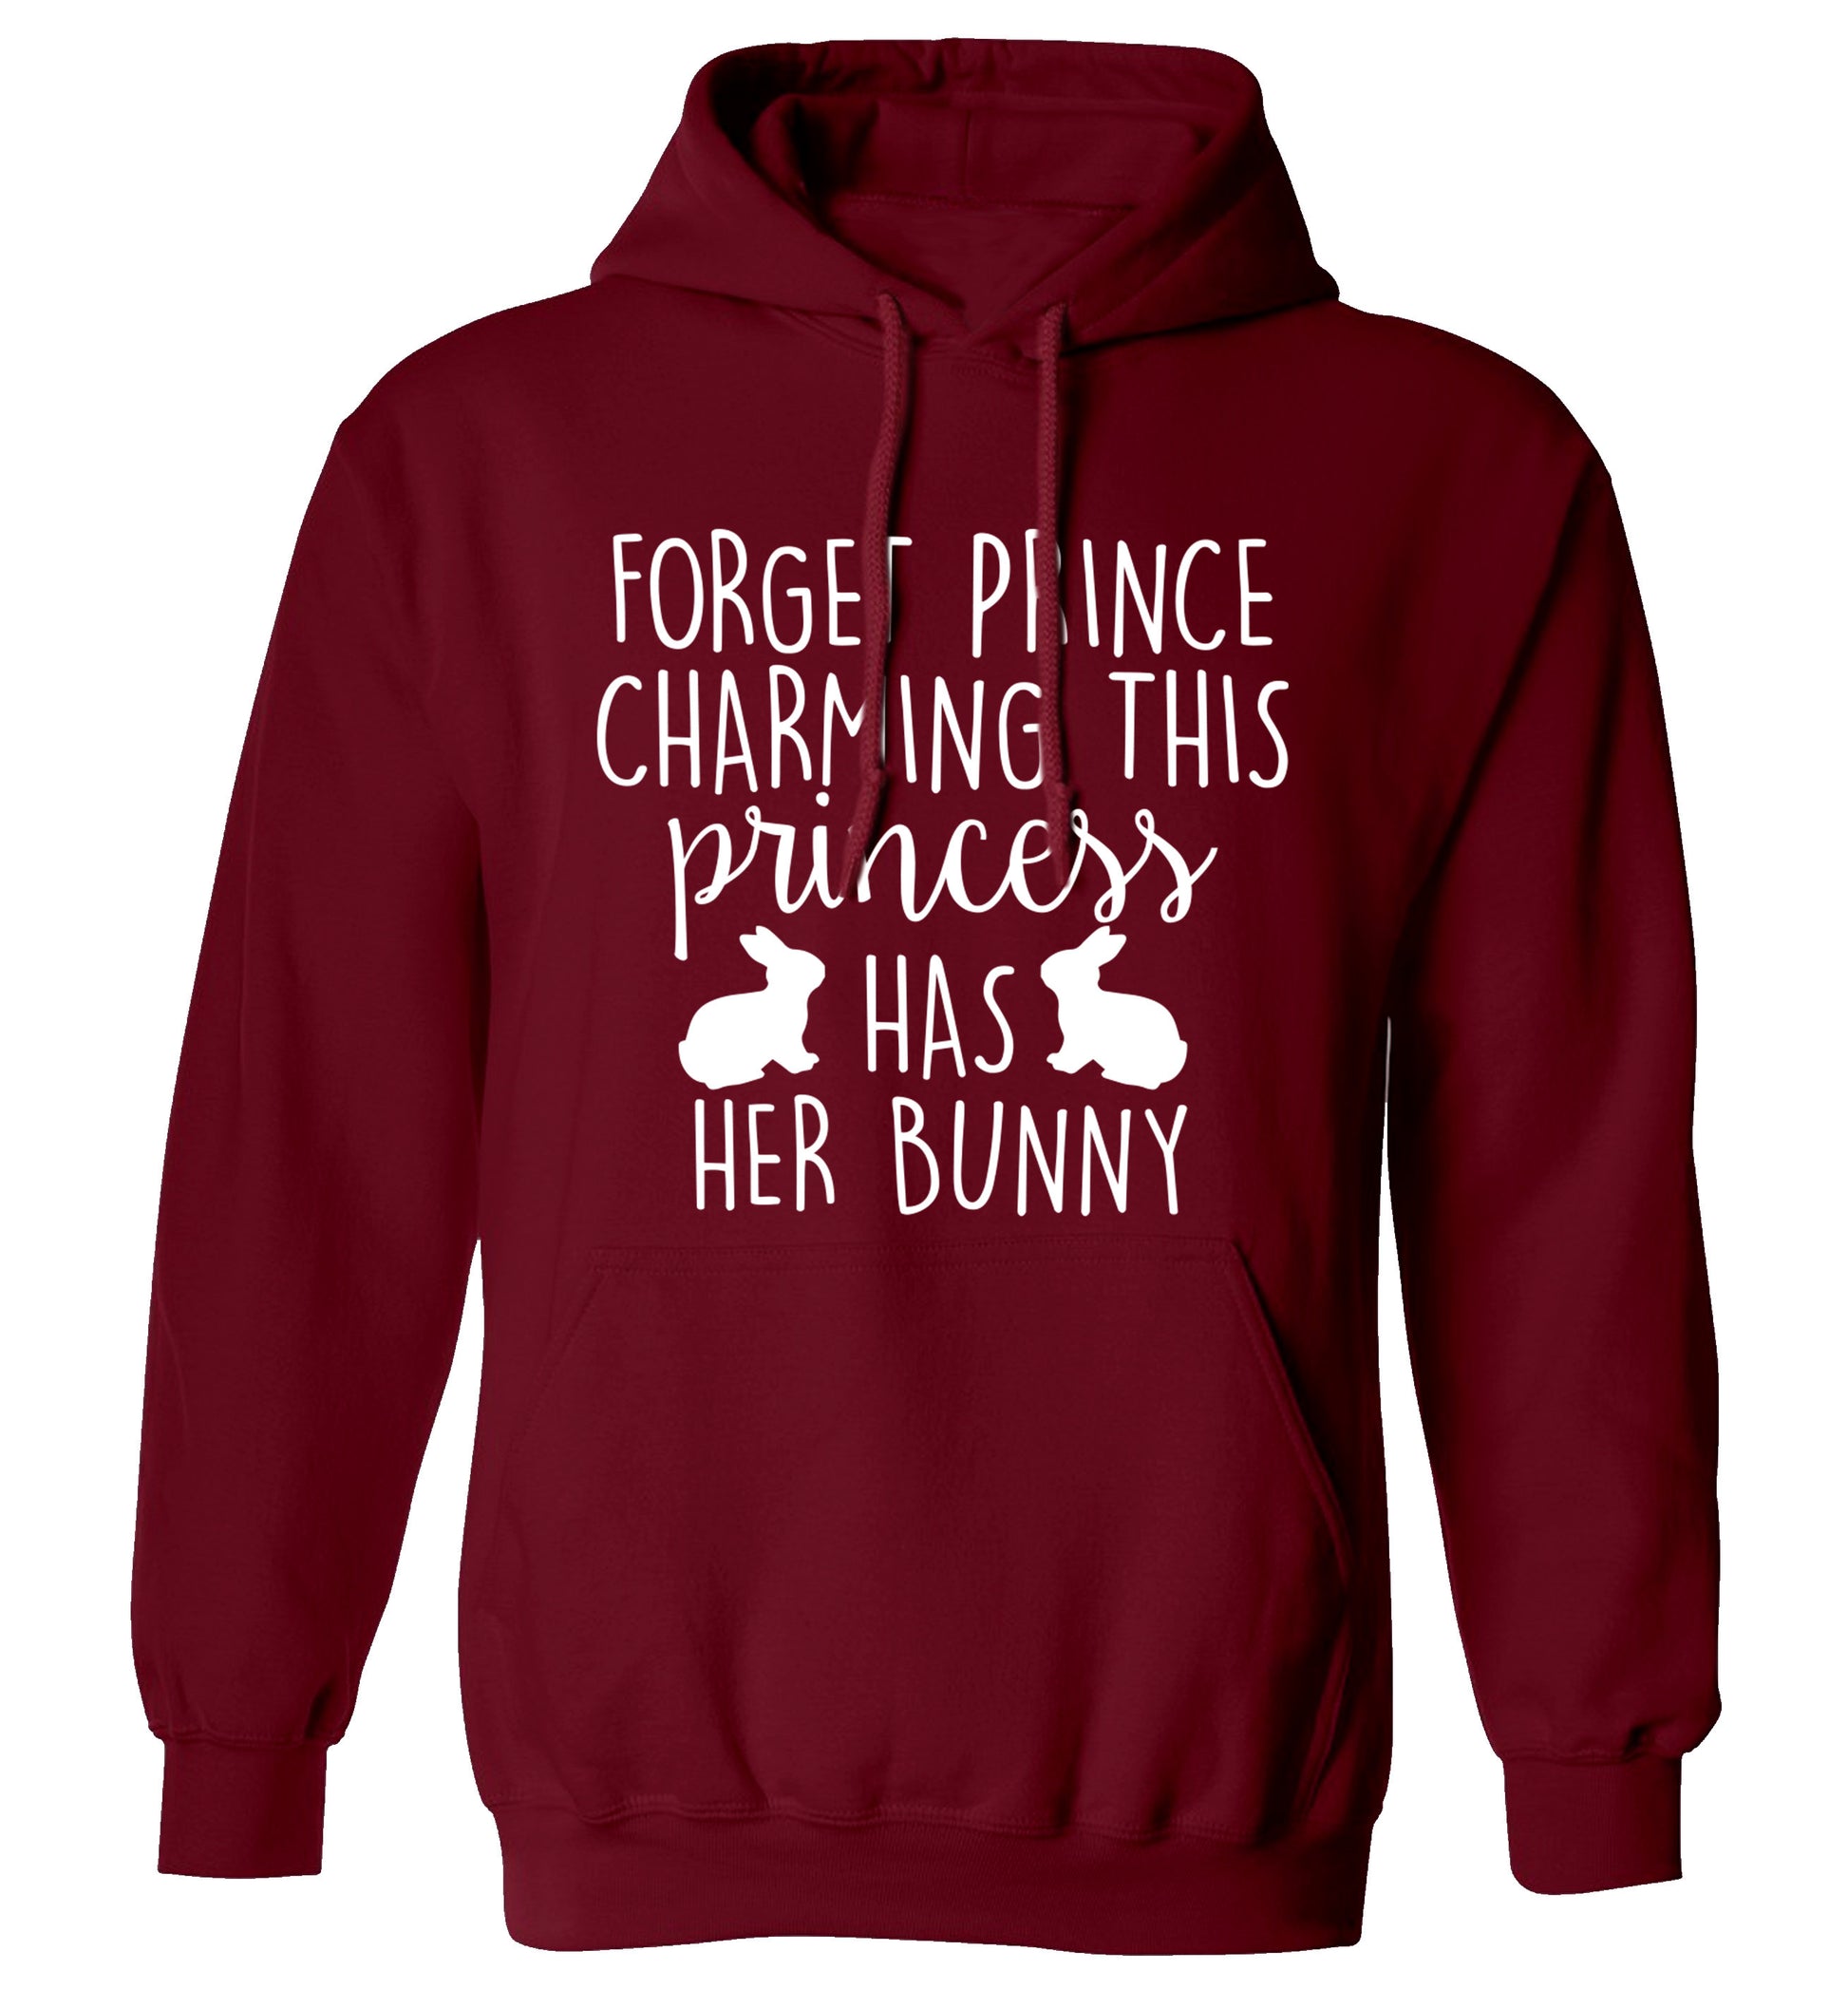 Forget prince charming this princess has her bunny adults unisex maroon hoodie 2XL